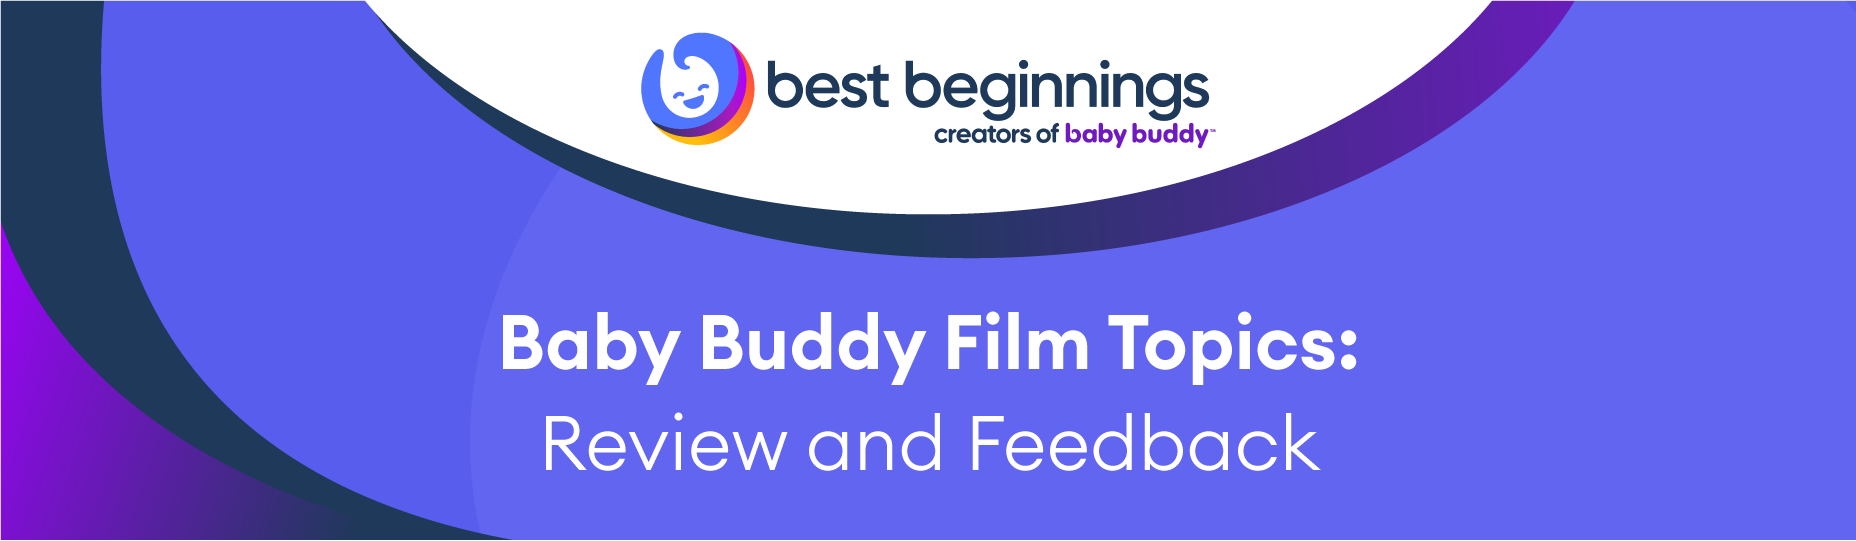 Best Beginnings logo stating Baby Buddy Film Topics Review and feedback